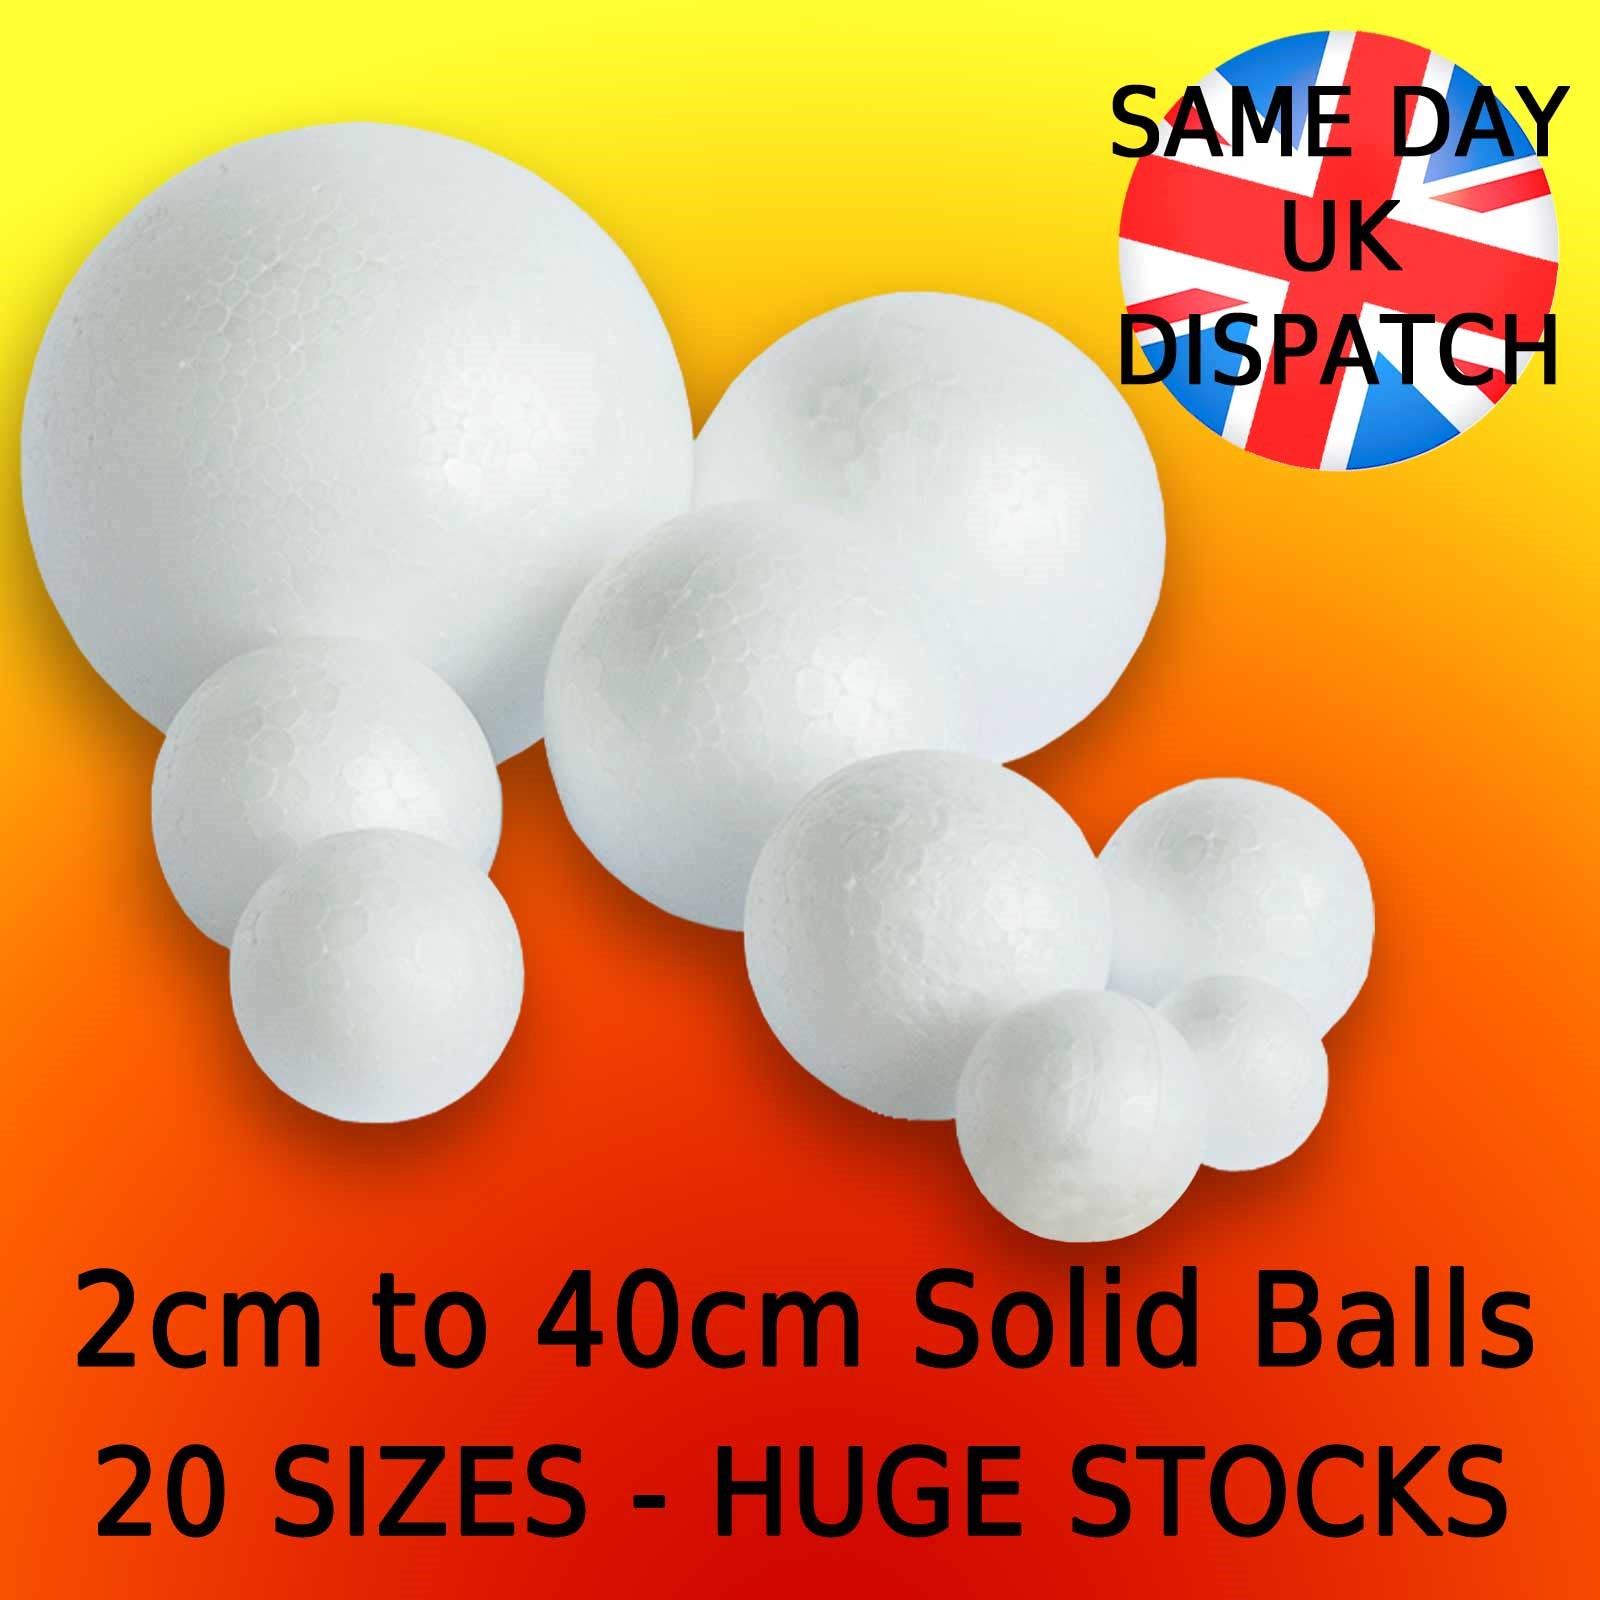 Large 300mm -12 inch Polystyrene Balls in 2 HOLLOW HALVES for craft  decoration